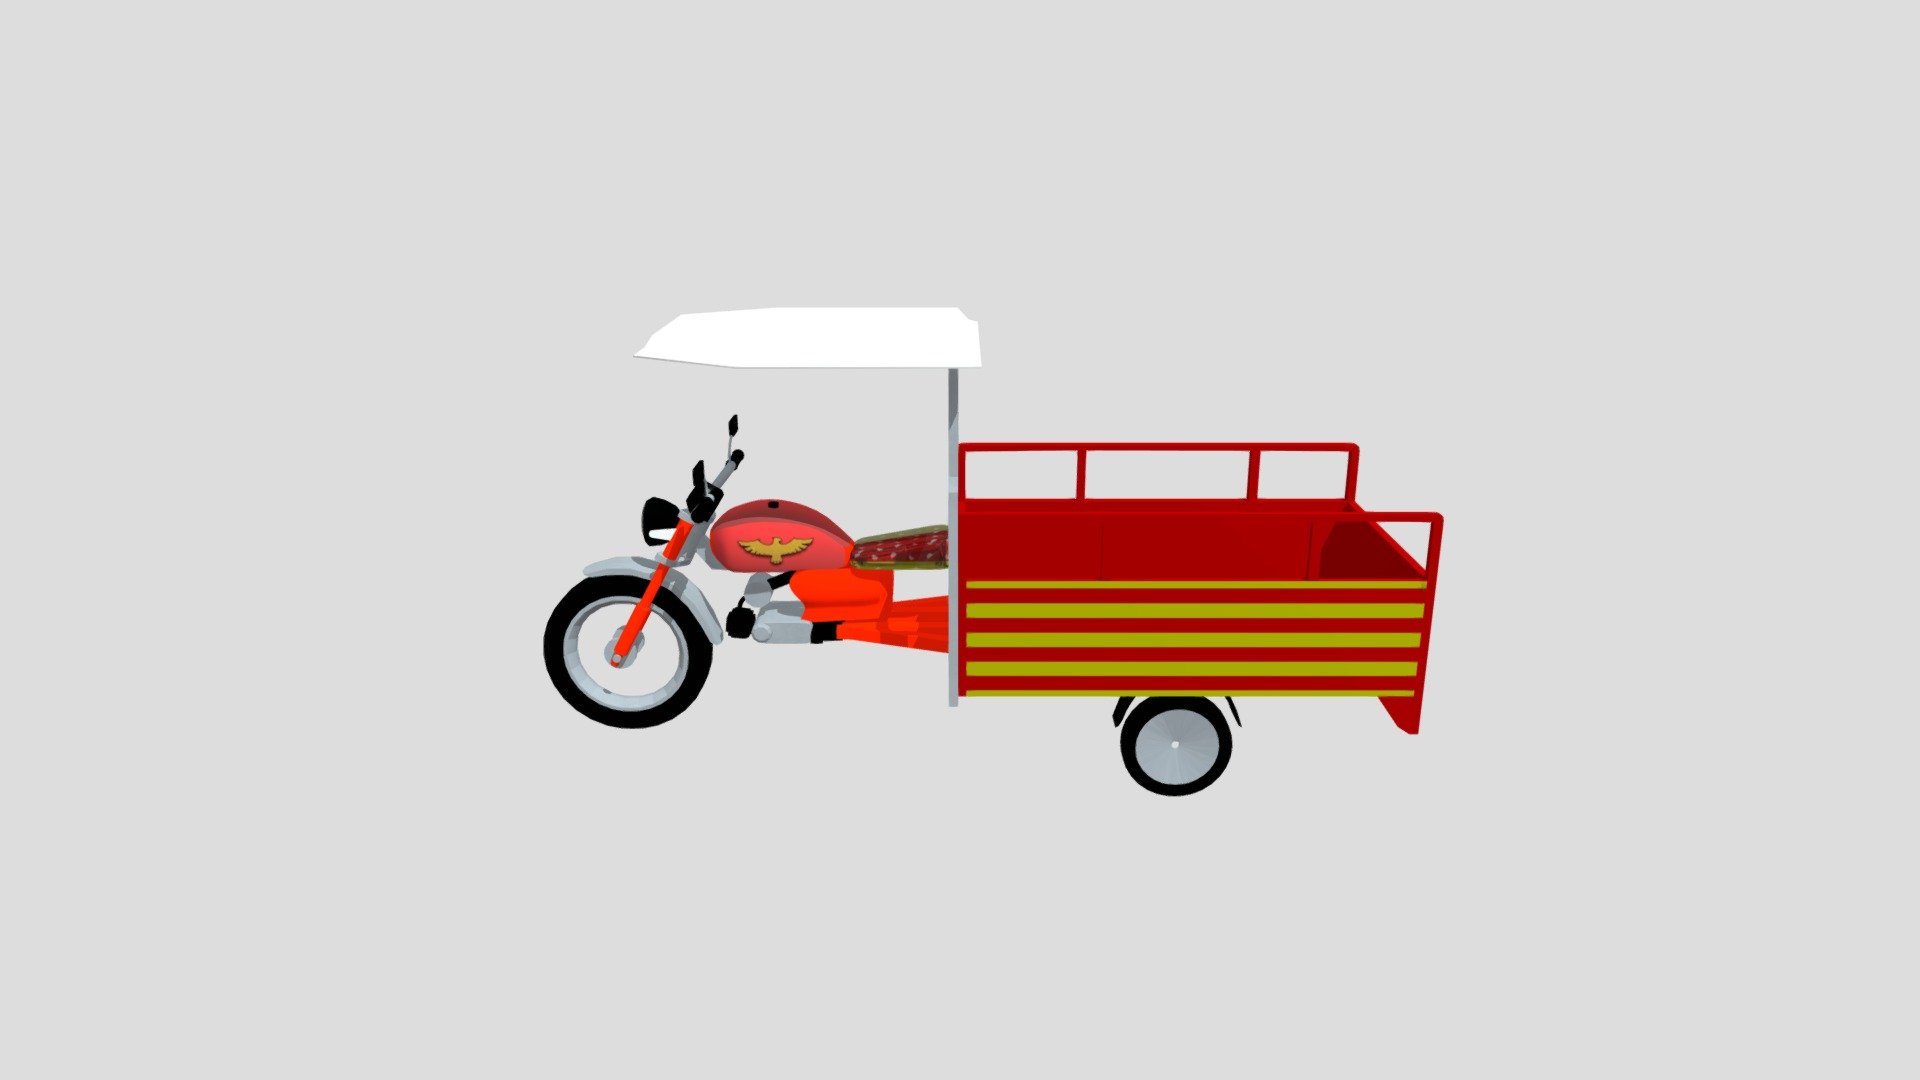 tuk tuk auto rickshaw chingchi 3d model. can be used in simulation games and 3d unity. also can be used in vr simulation. low poly 3d model for 3d modelers basic verison of a chingchi 3d model